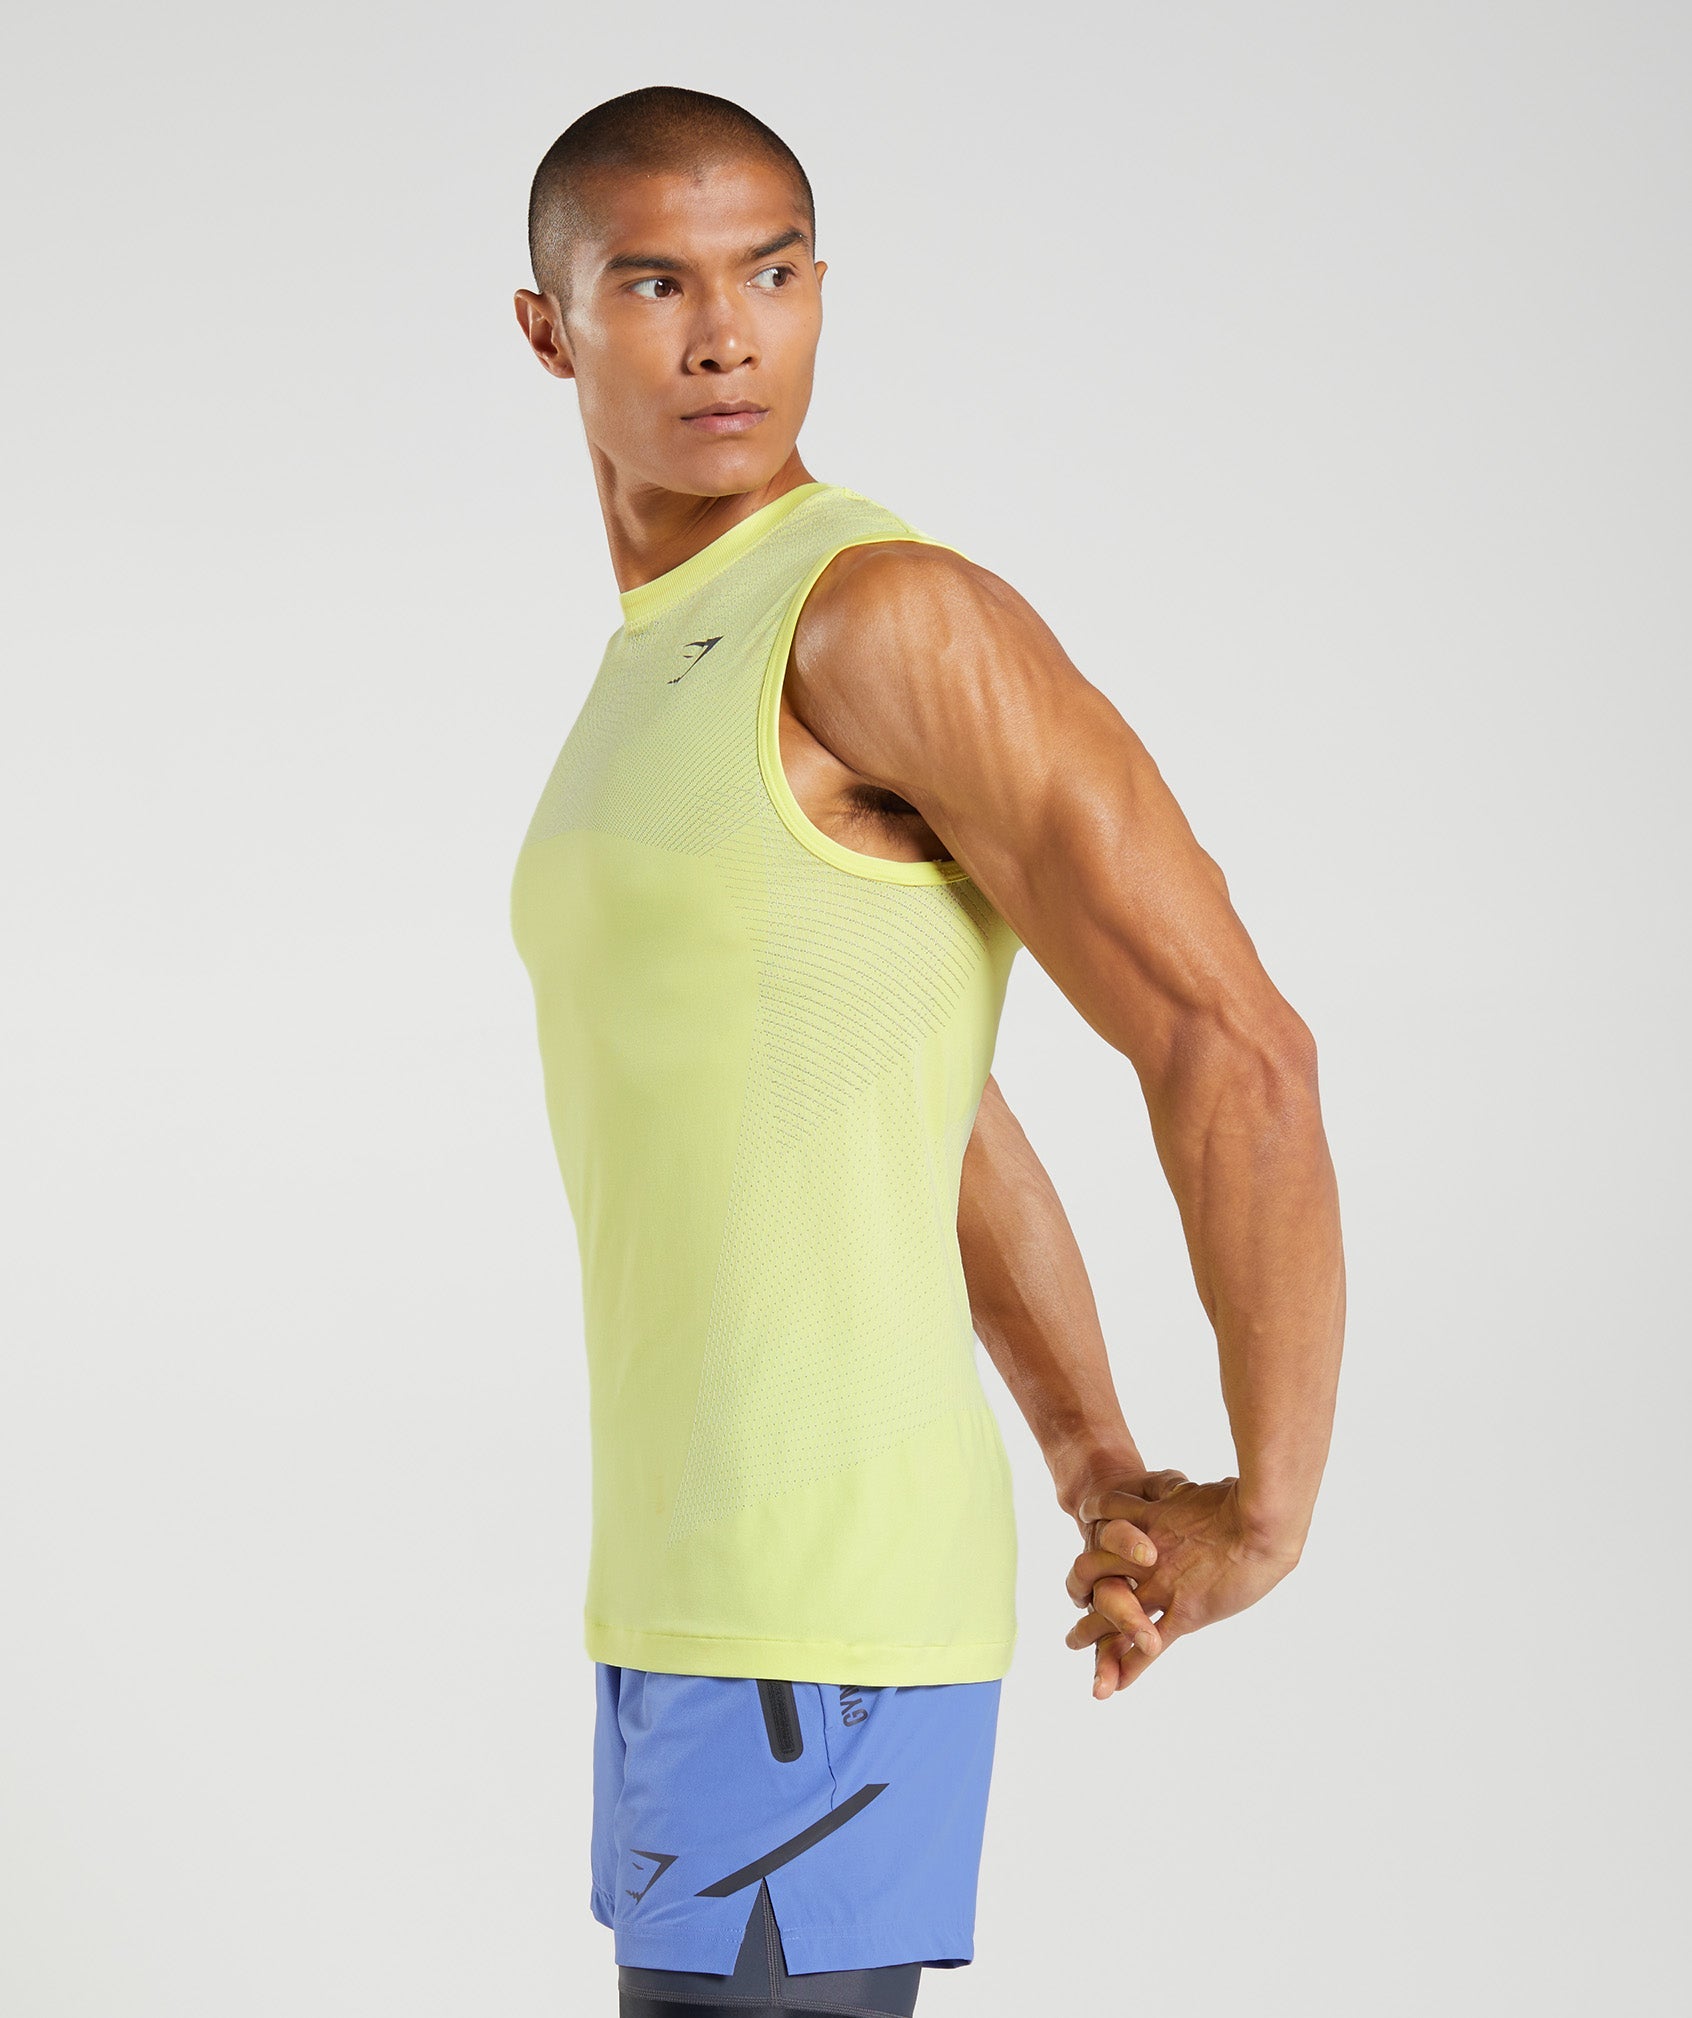 Apex Seamless Tank in Firefly Green/White - view 3